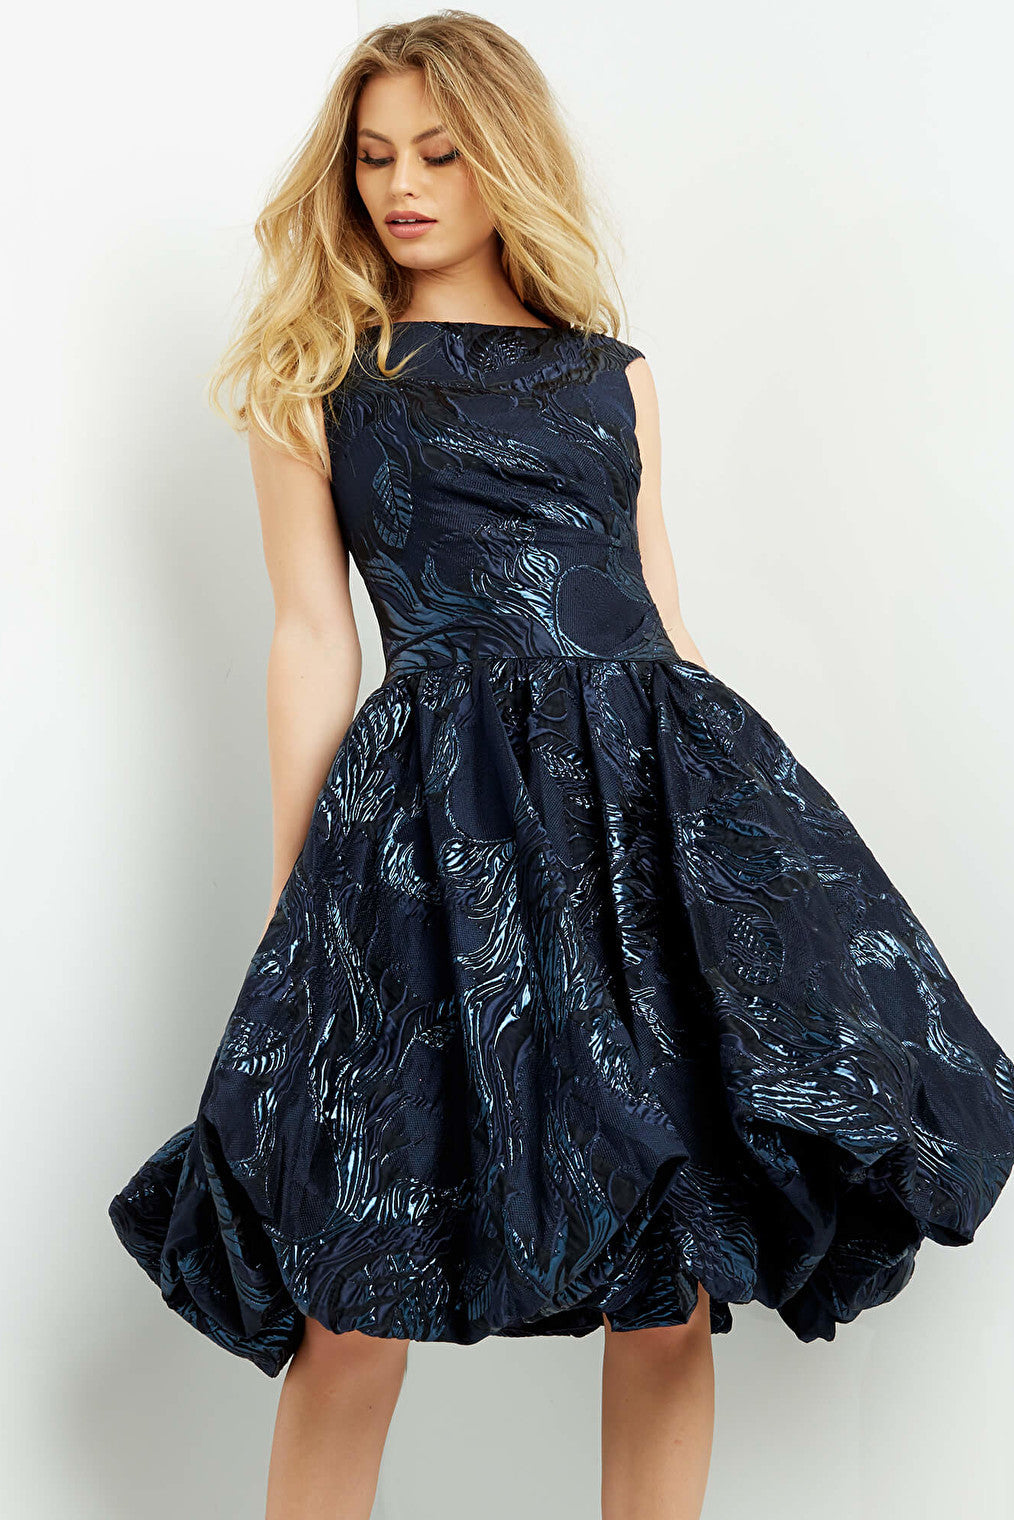 Jovani 05016 Navy Fit and Flare Knee Length Cocktail Dress